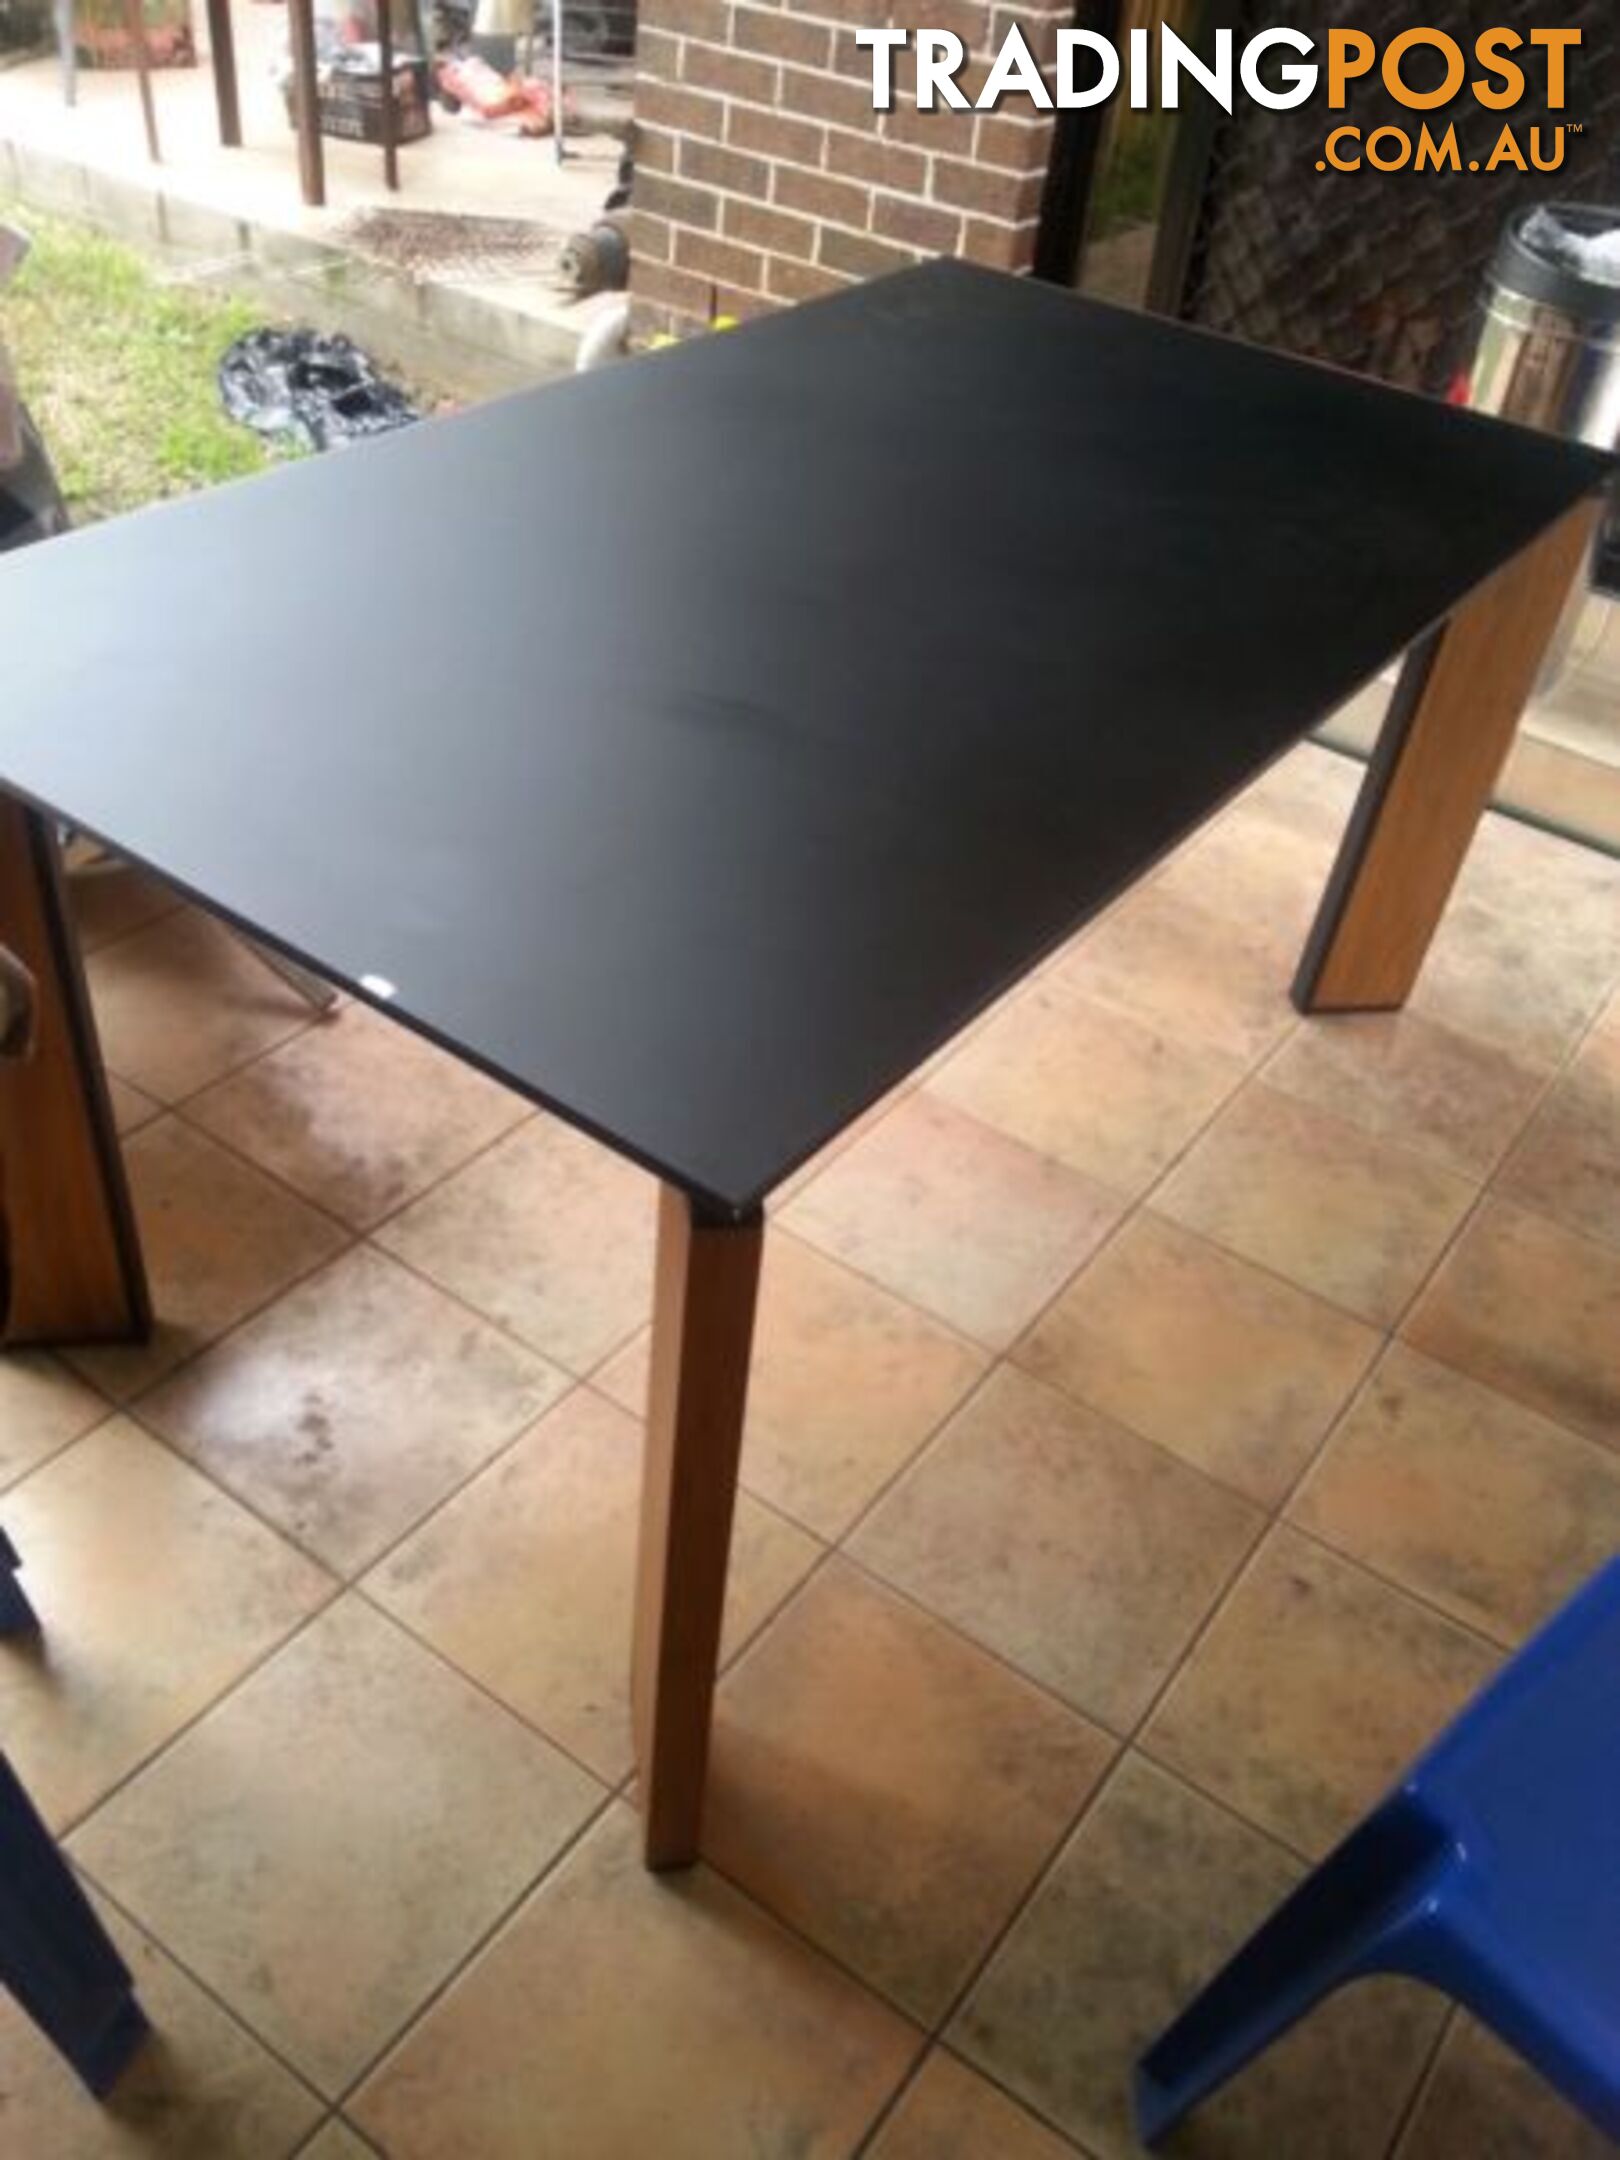 class table with wooden legs